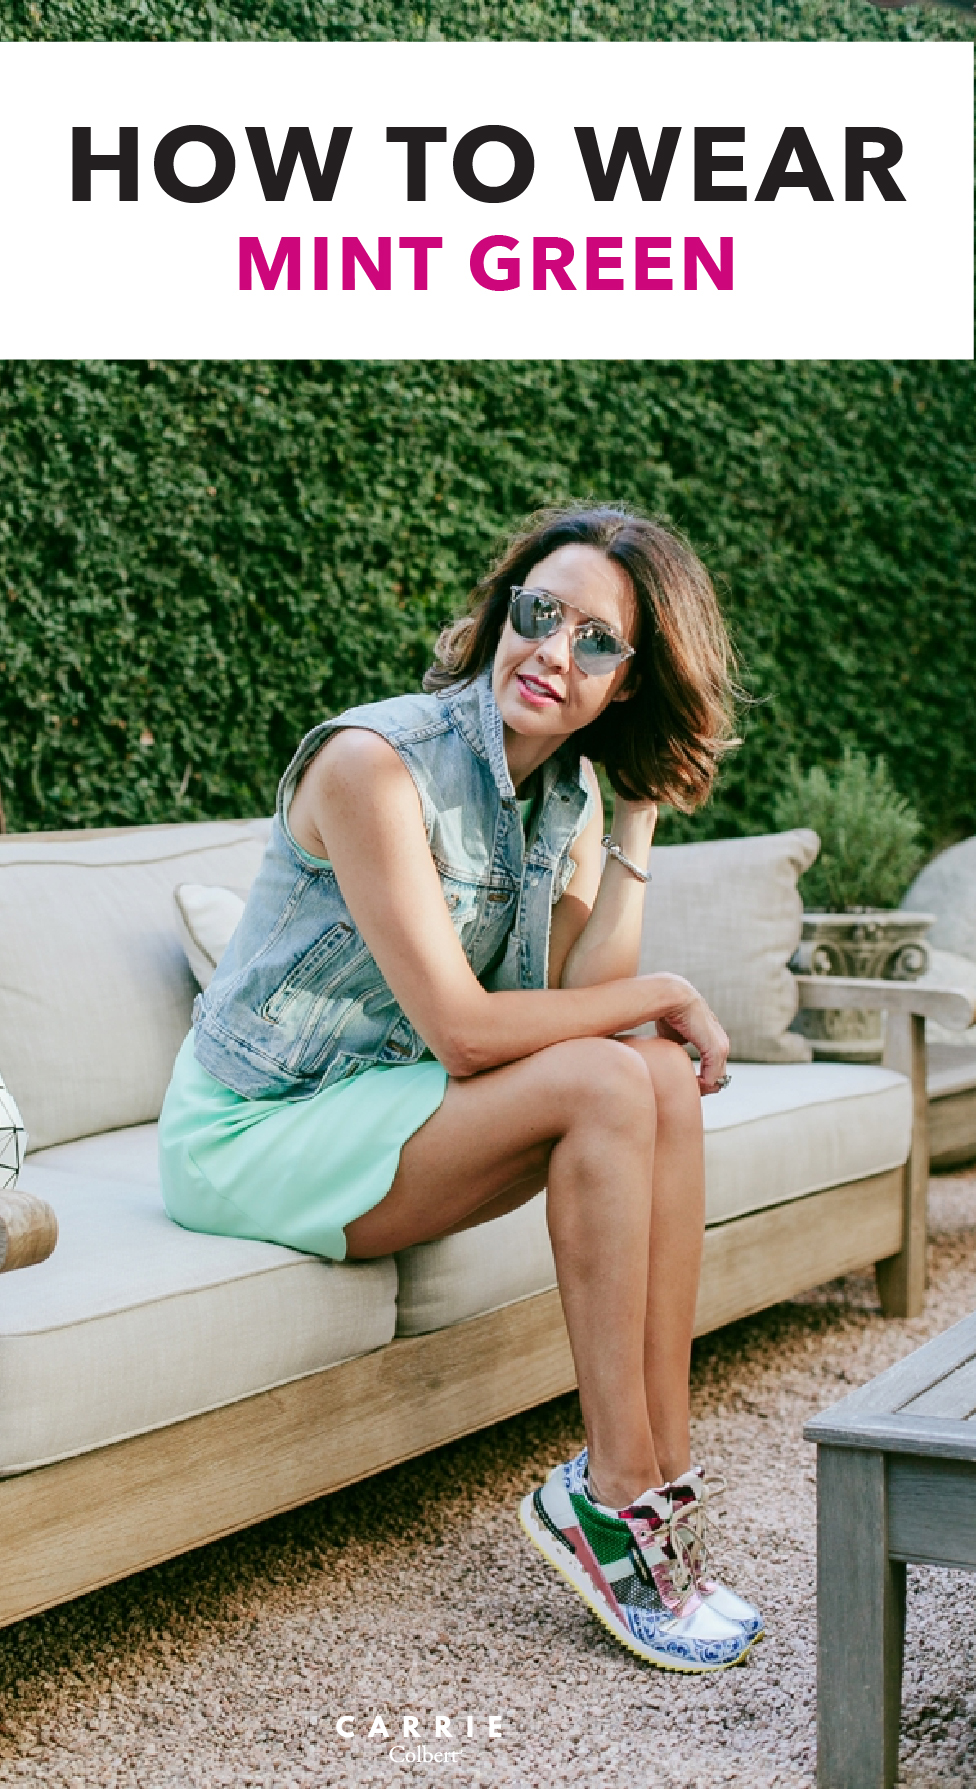 10 Ideas for Wearing Mint Green - Carrie Colbert